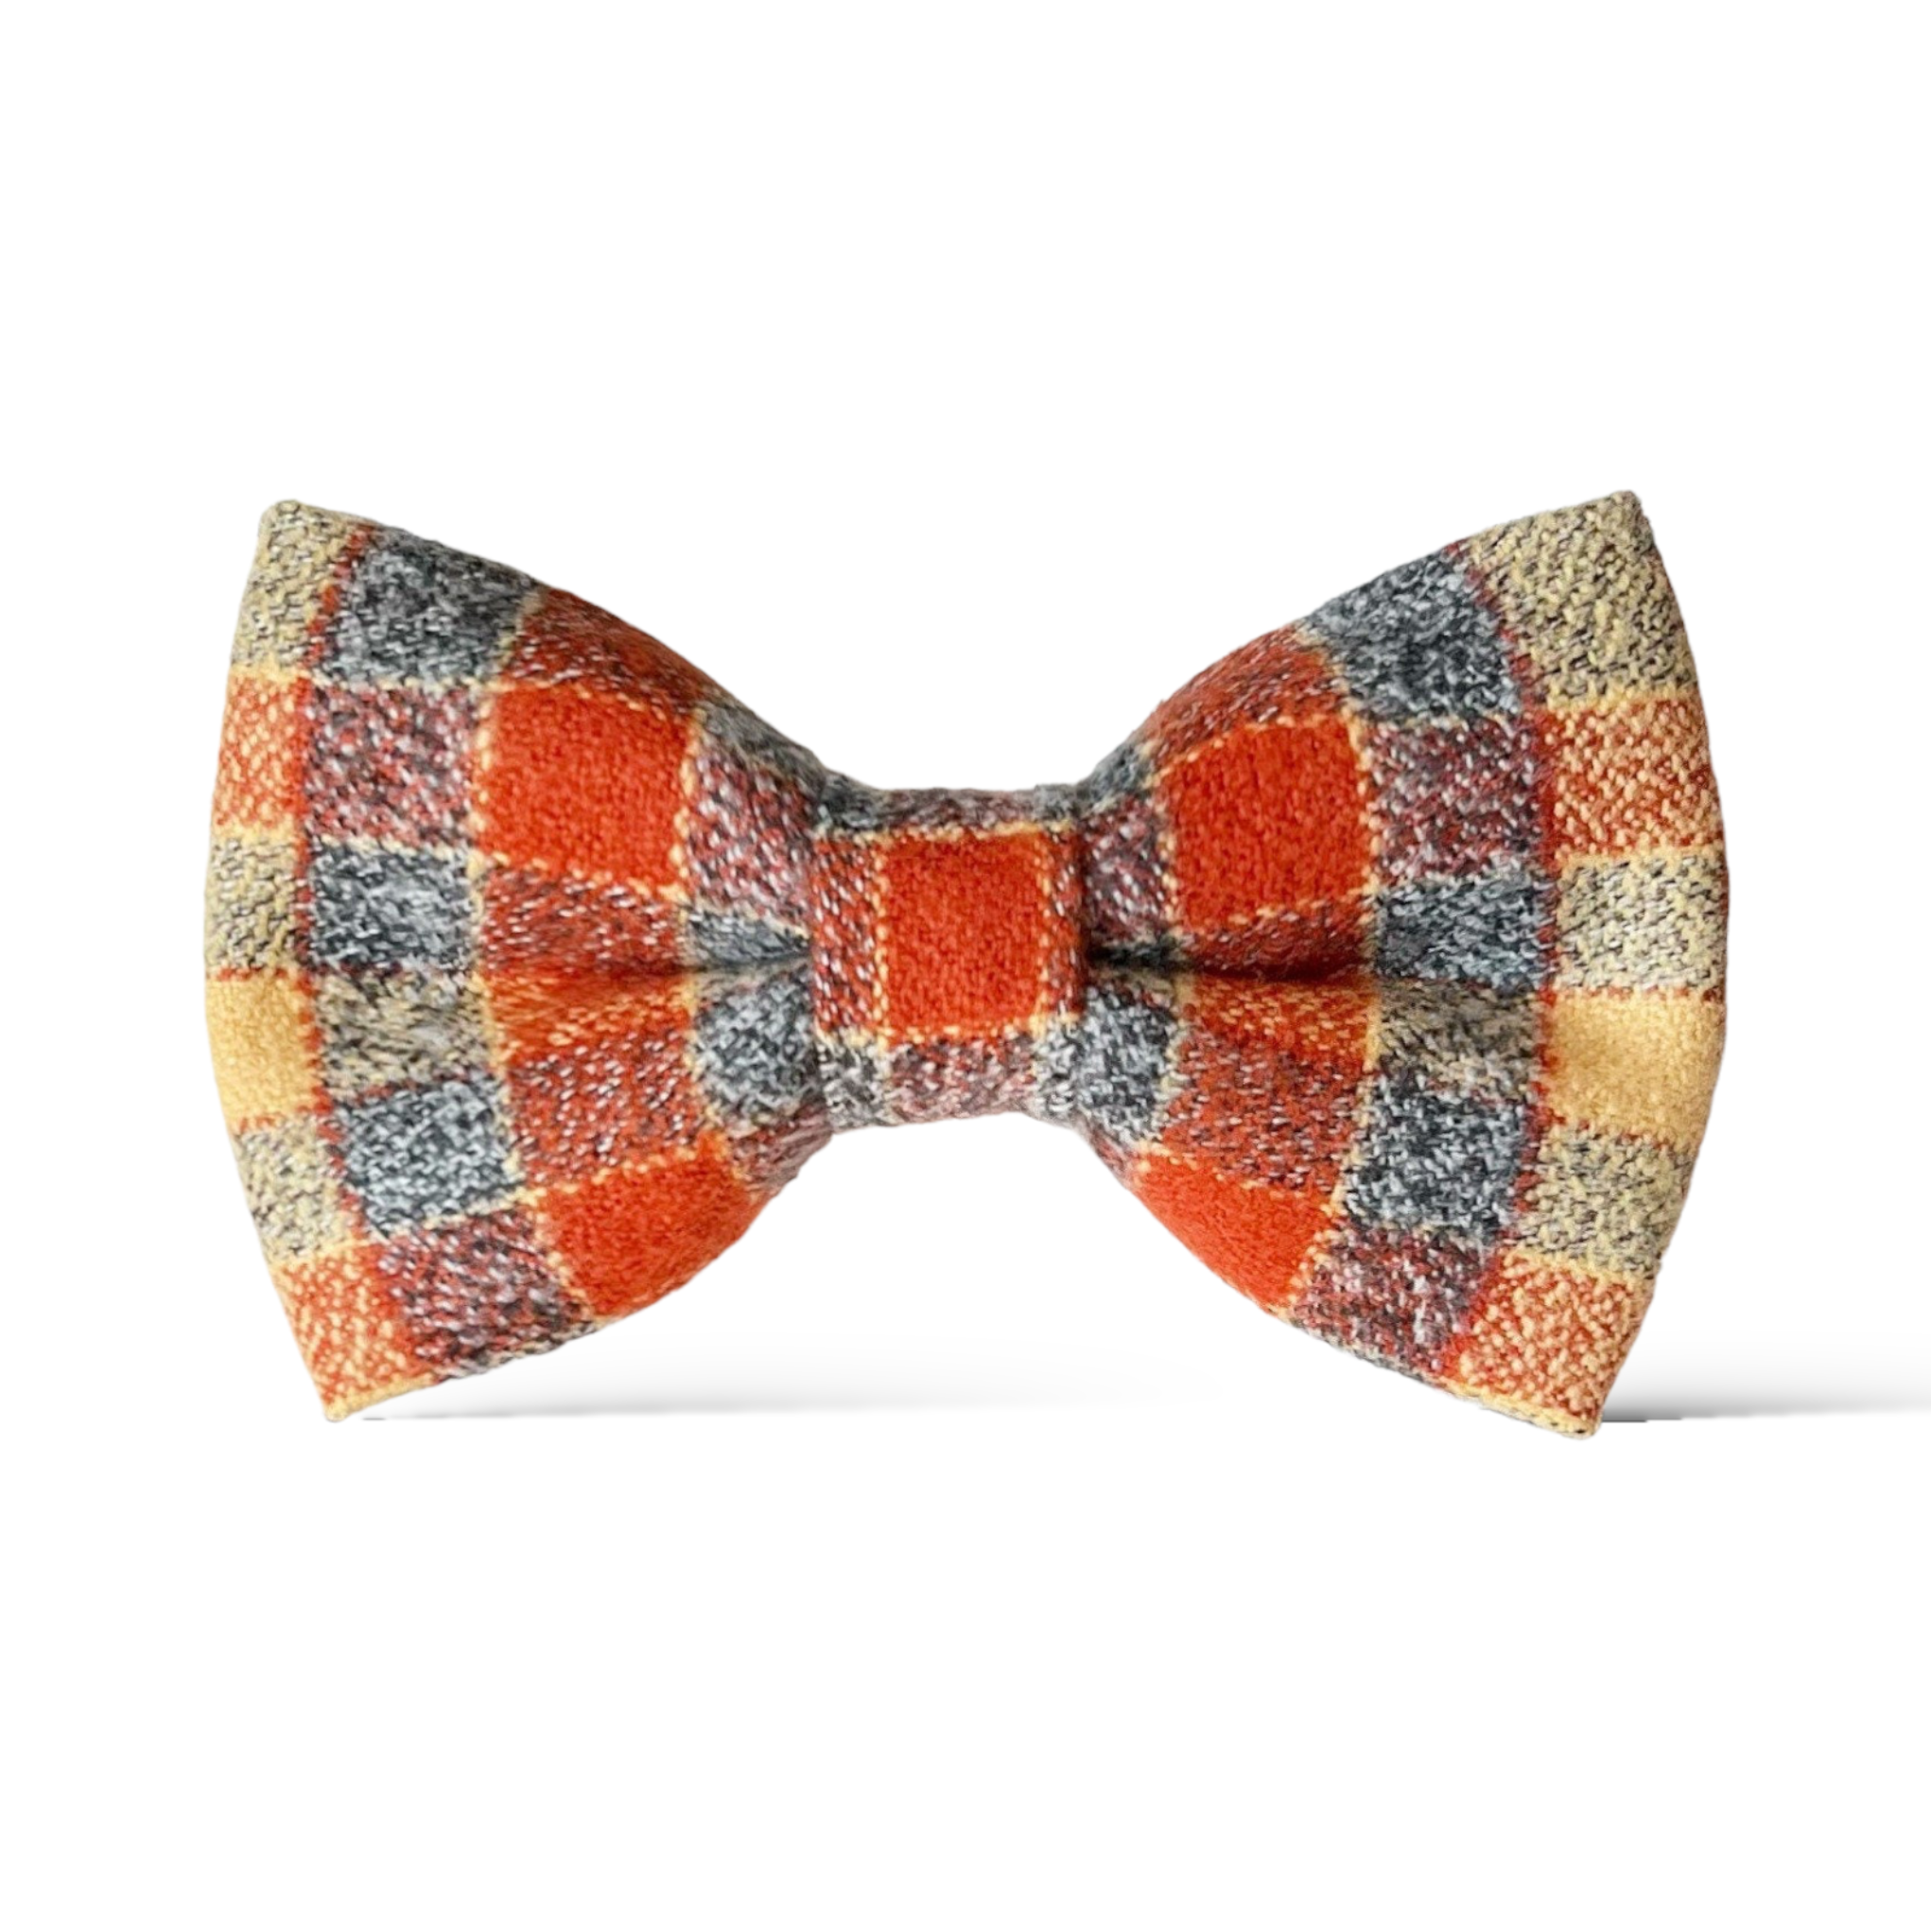 Fall Flannel Bow Tie